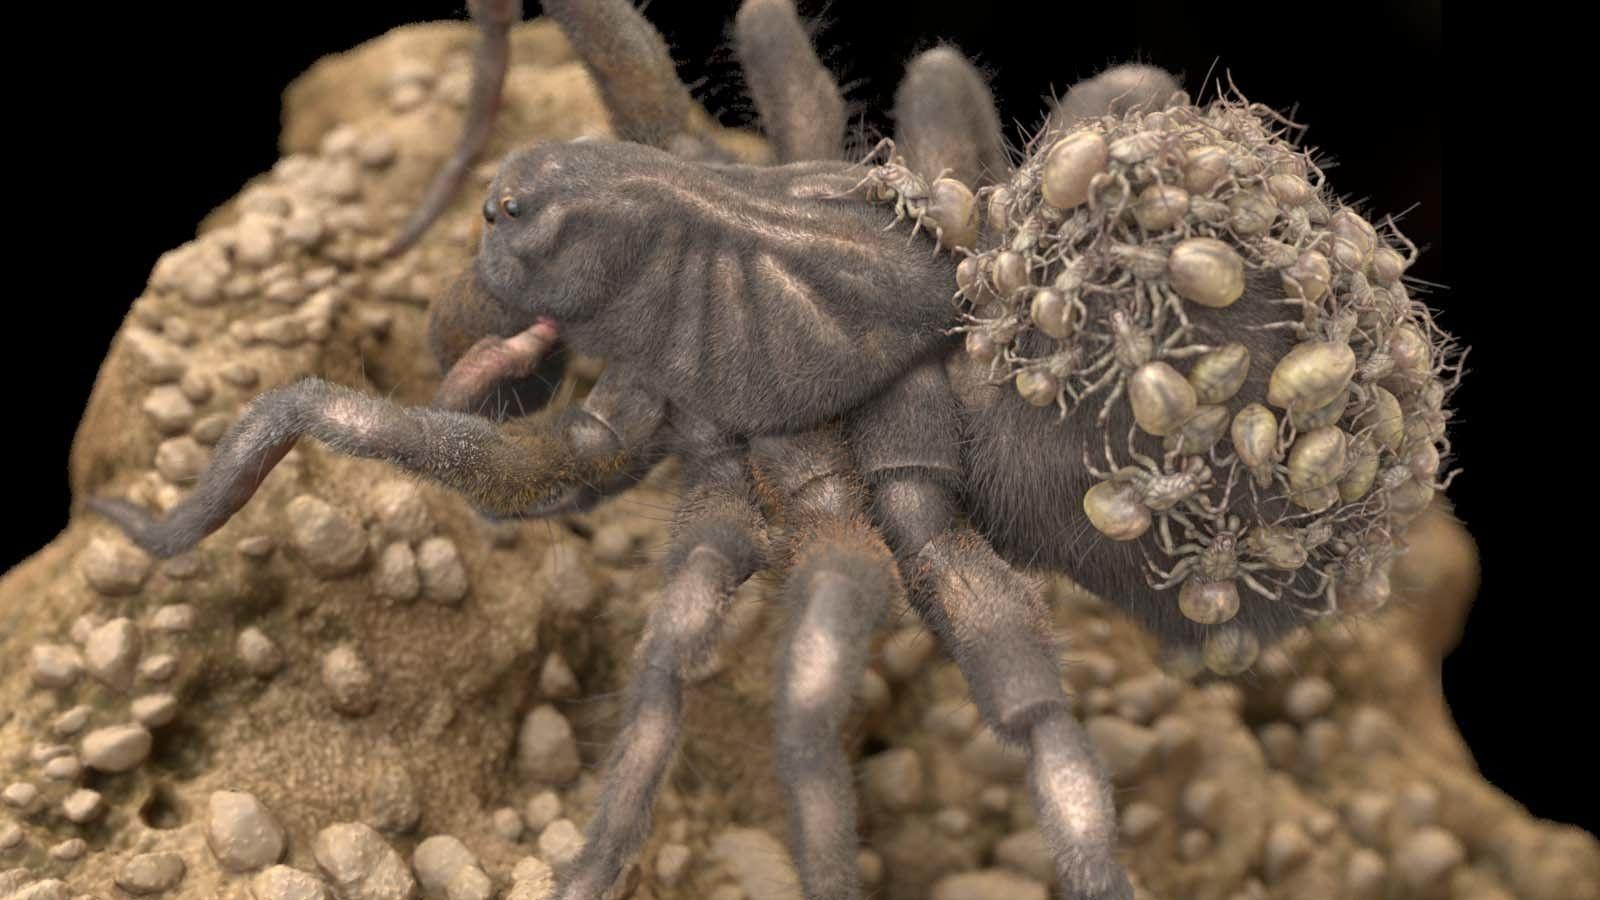 Wolf Spider and Babies, Eric Keller